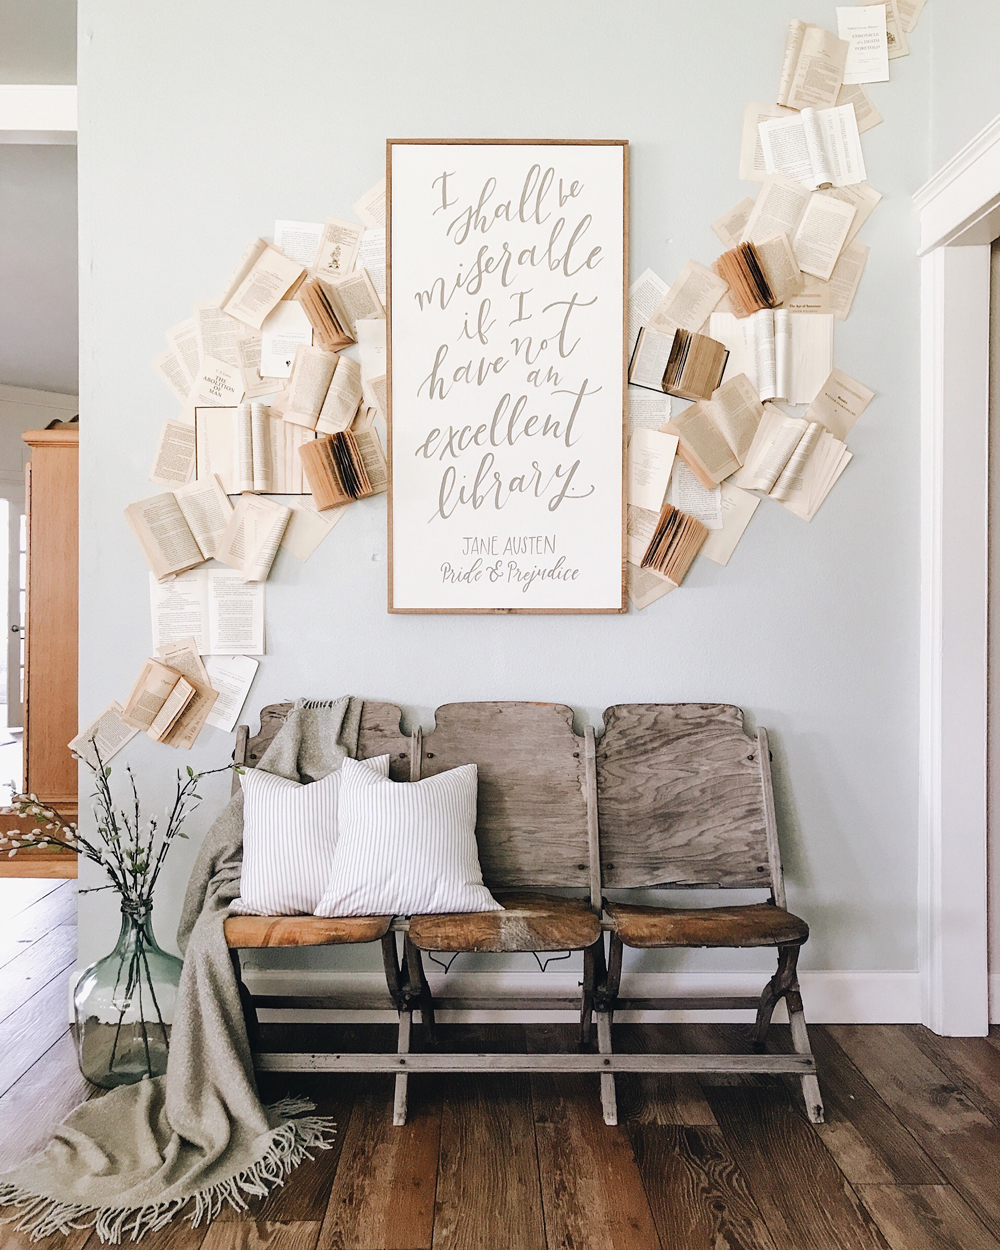 A DIY creation featuring a framed photo of a book surrounded by a flurry of open books and torn pages that climb up the wall